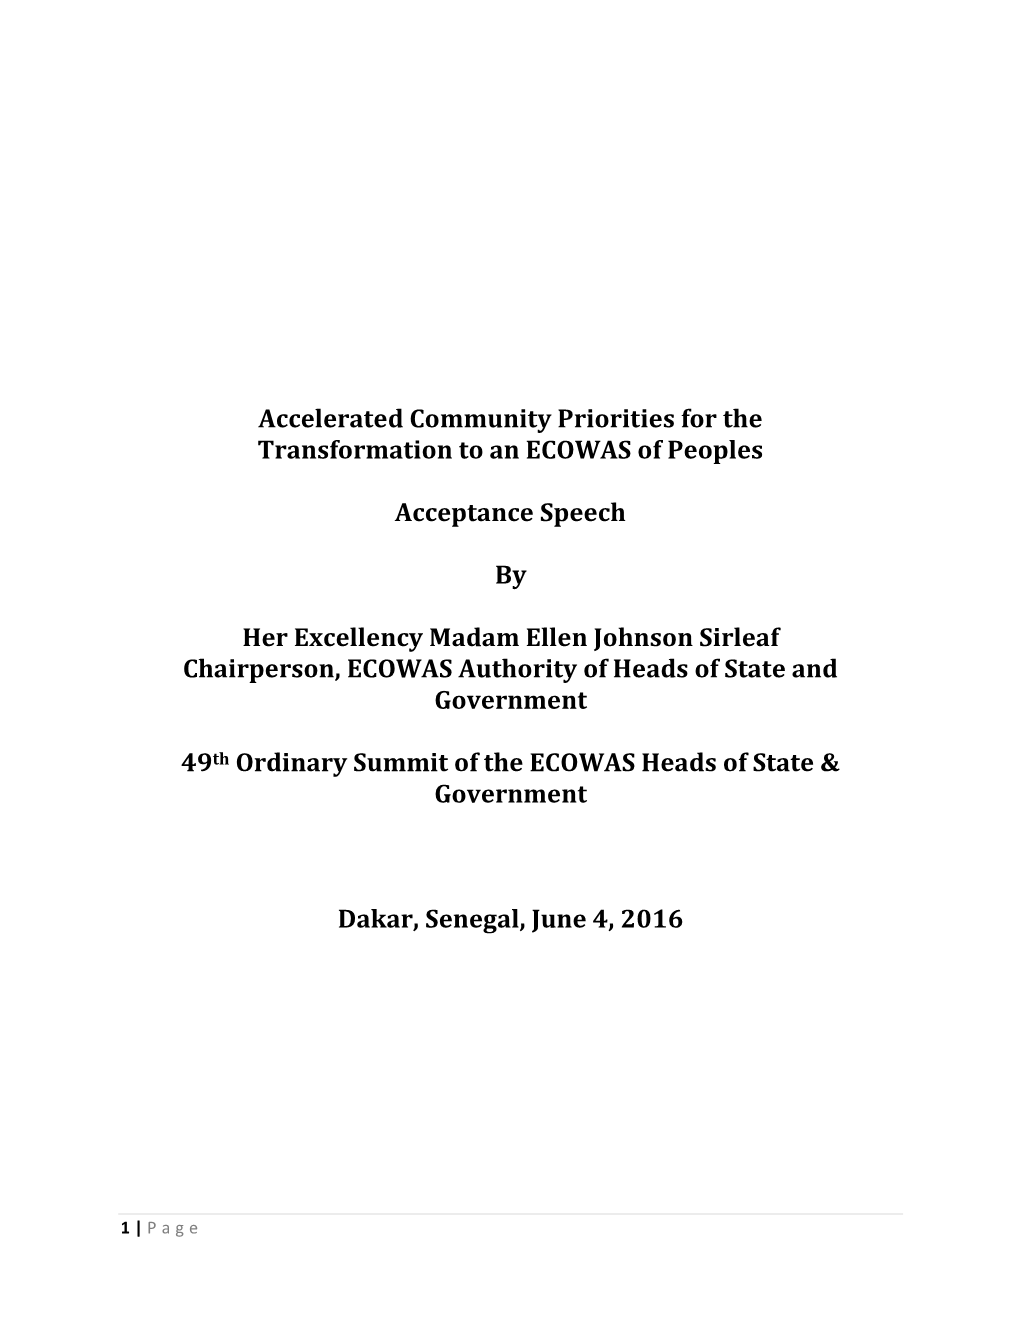 Accelerated Community Priorities for the Transformation to an ECOWAS of Peoples